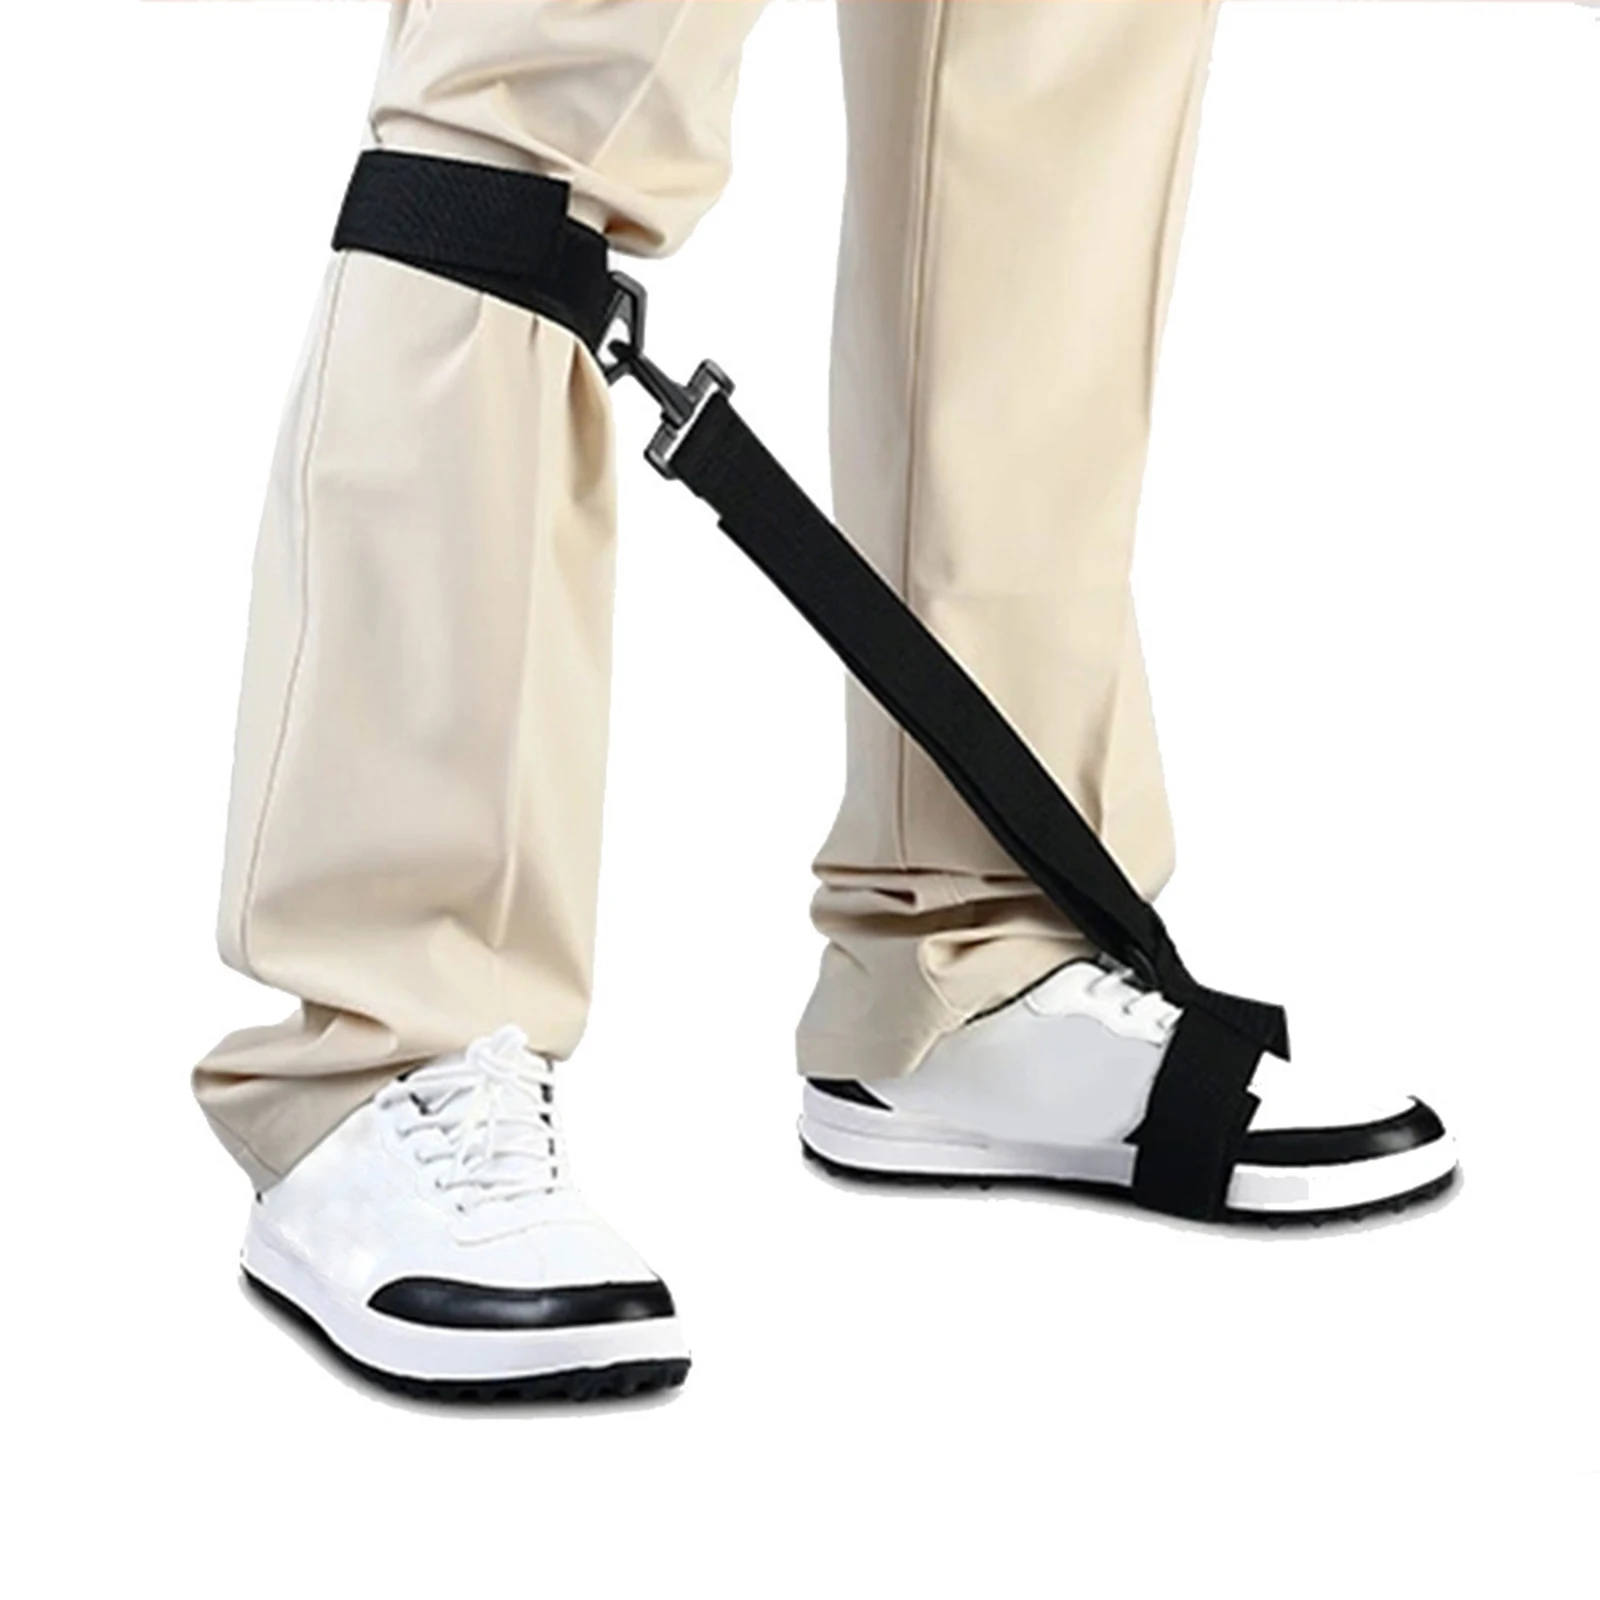 

Professional Golf Swing Trainer Leg Foot Band Posture Correcting Belt Gesture Alignment Training Aid for Practicing